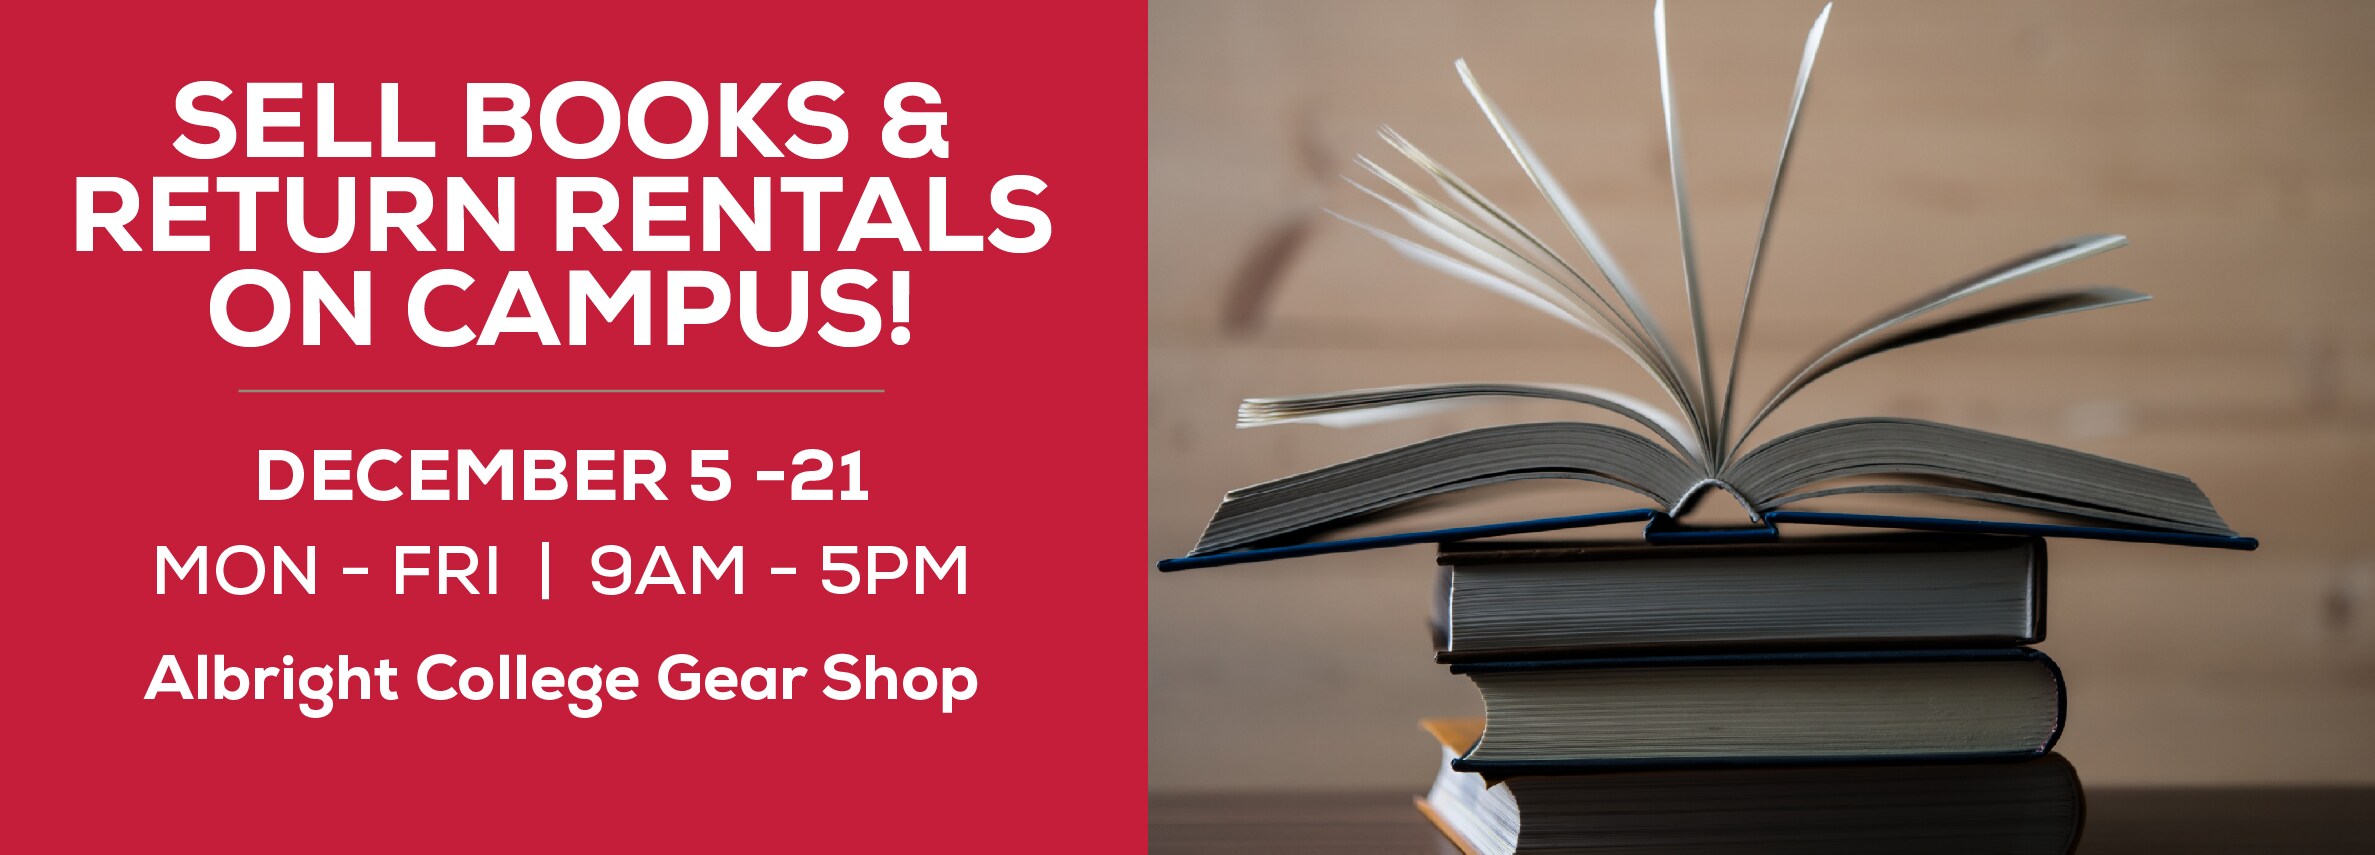 Sell books & return rentals on campus! December 5 - 21. Monday through Friday. 9am to 5pm. Albright College Gear Shop.